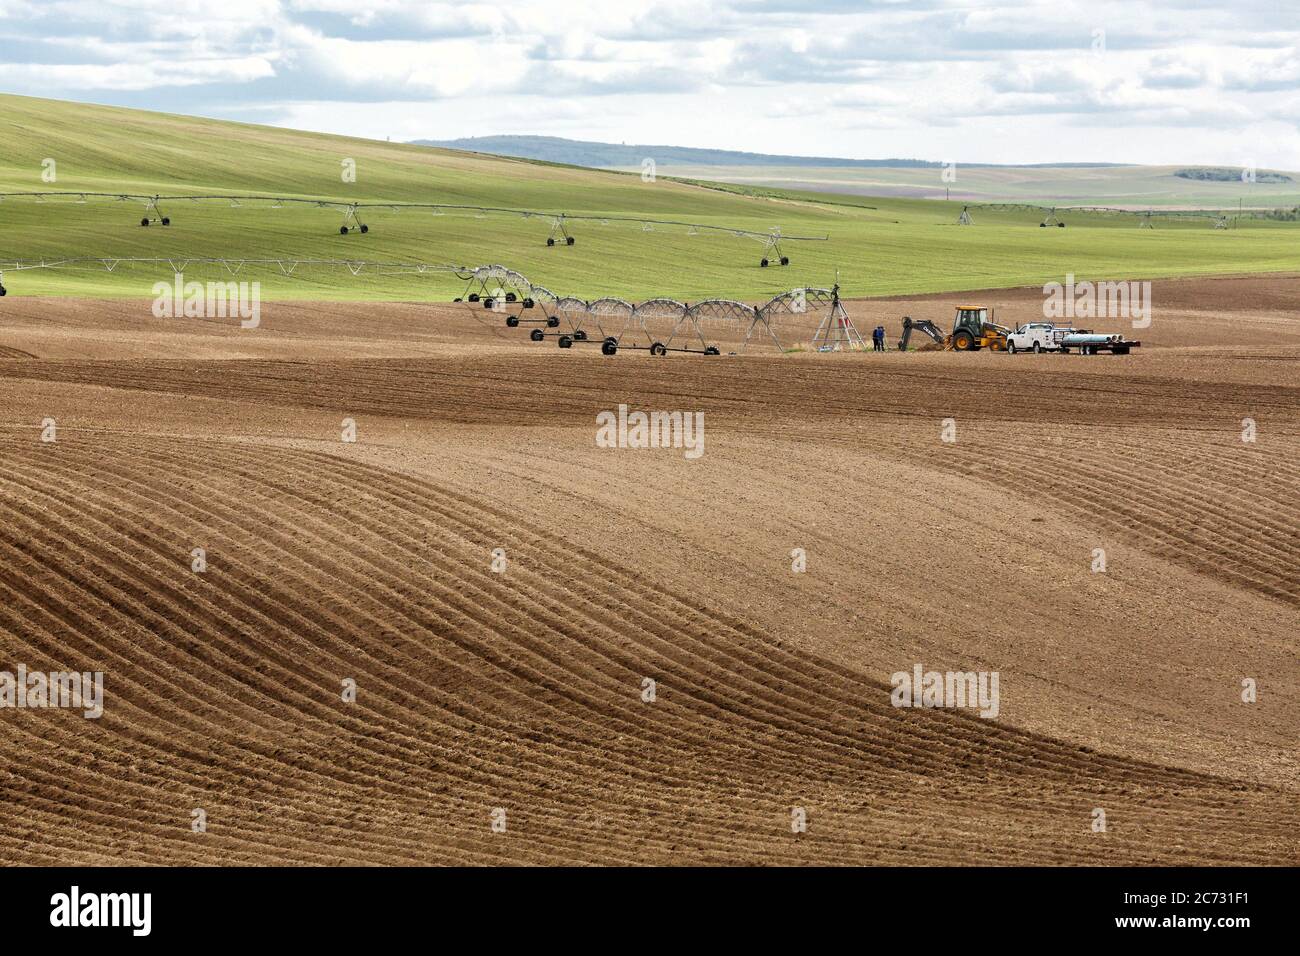 A tractor in a farm field, pulling a plowing and cultivation implement, to plow and aerates the soil in preparation for planting Idaho potatoes. Stock Photo